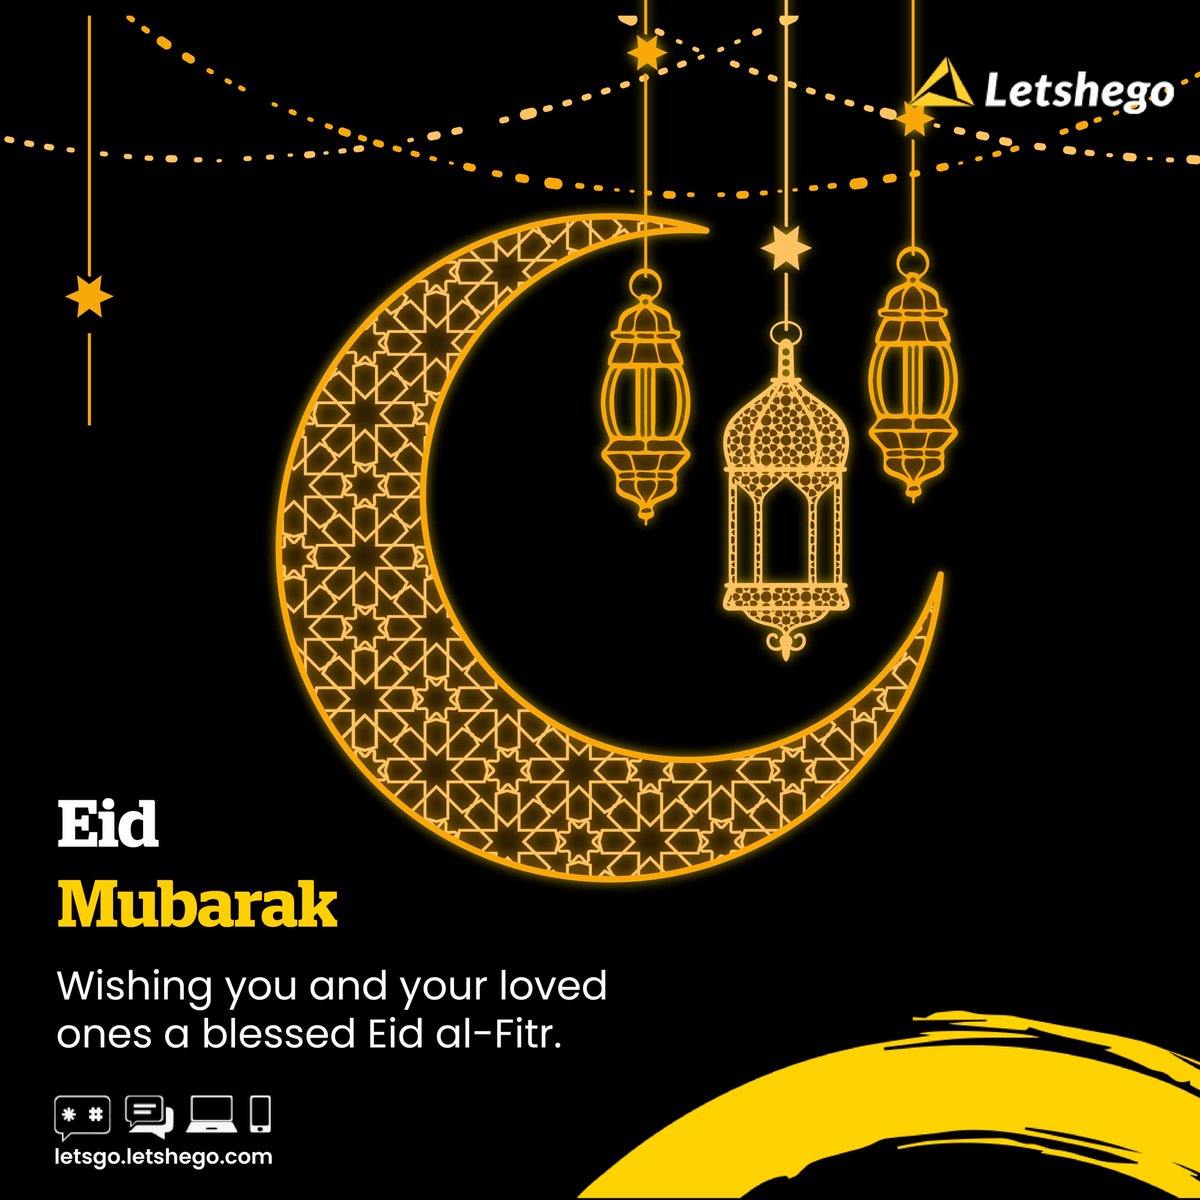 Wishing you and your loved ones a blessed Eid al-Fitr filled with joy, peace, and happiness. May this special day bring you closer to family and friends, and may your hearts be filled with gratitude and kindness. Eid Mubarak! 🌙✨ #EidAlFitr #Letshego